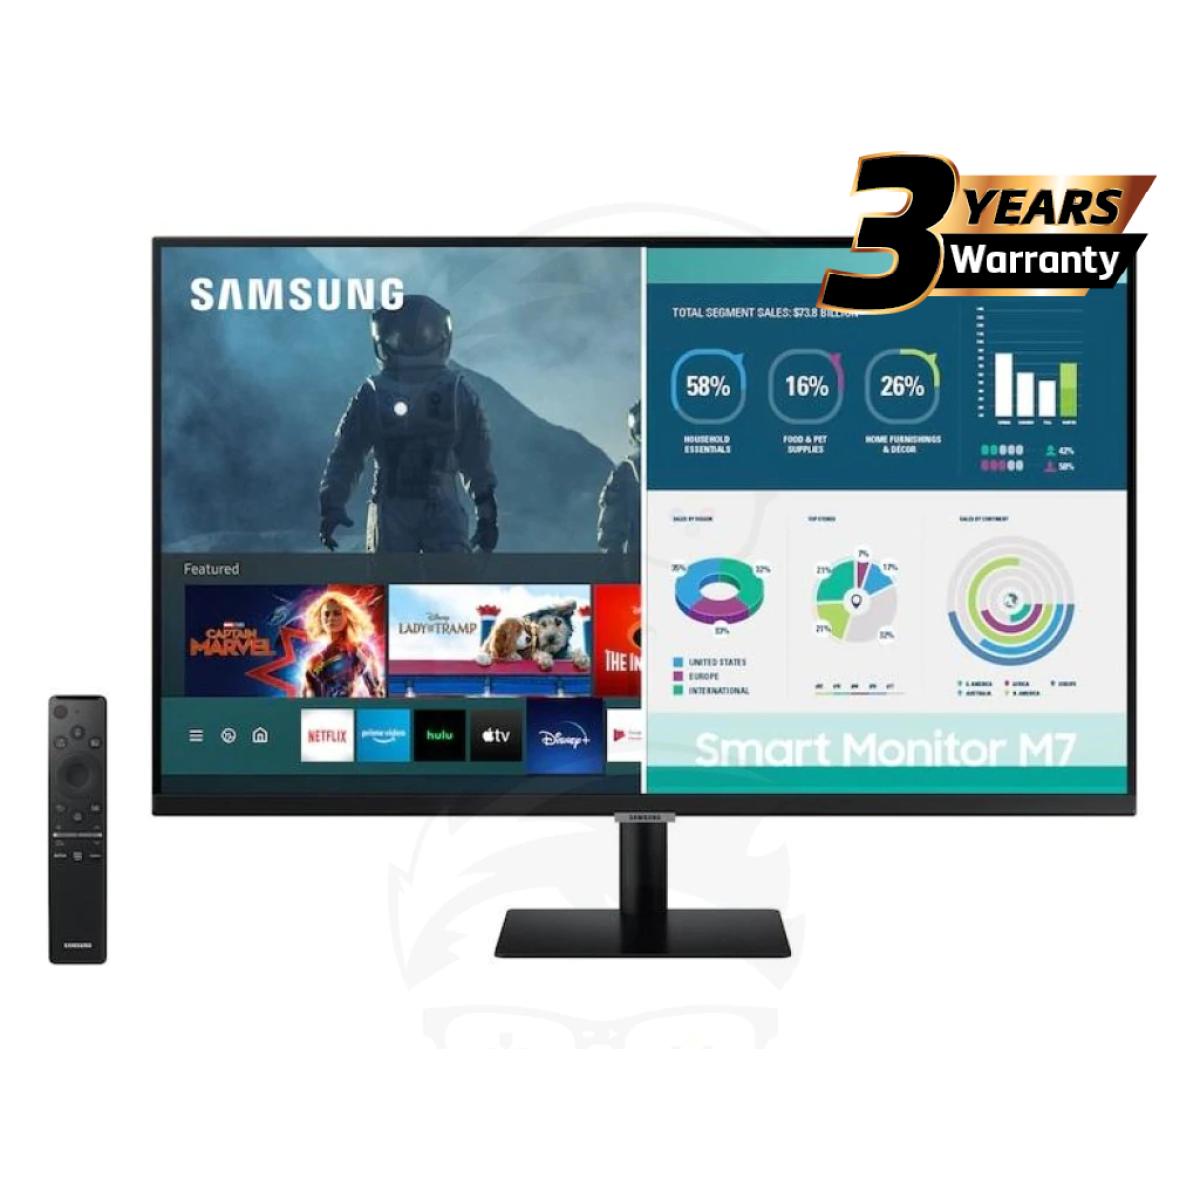 Samsung 32" M70A 4K UHD Smart Monitor with Streaming TV in Black